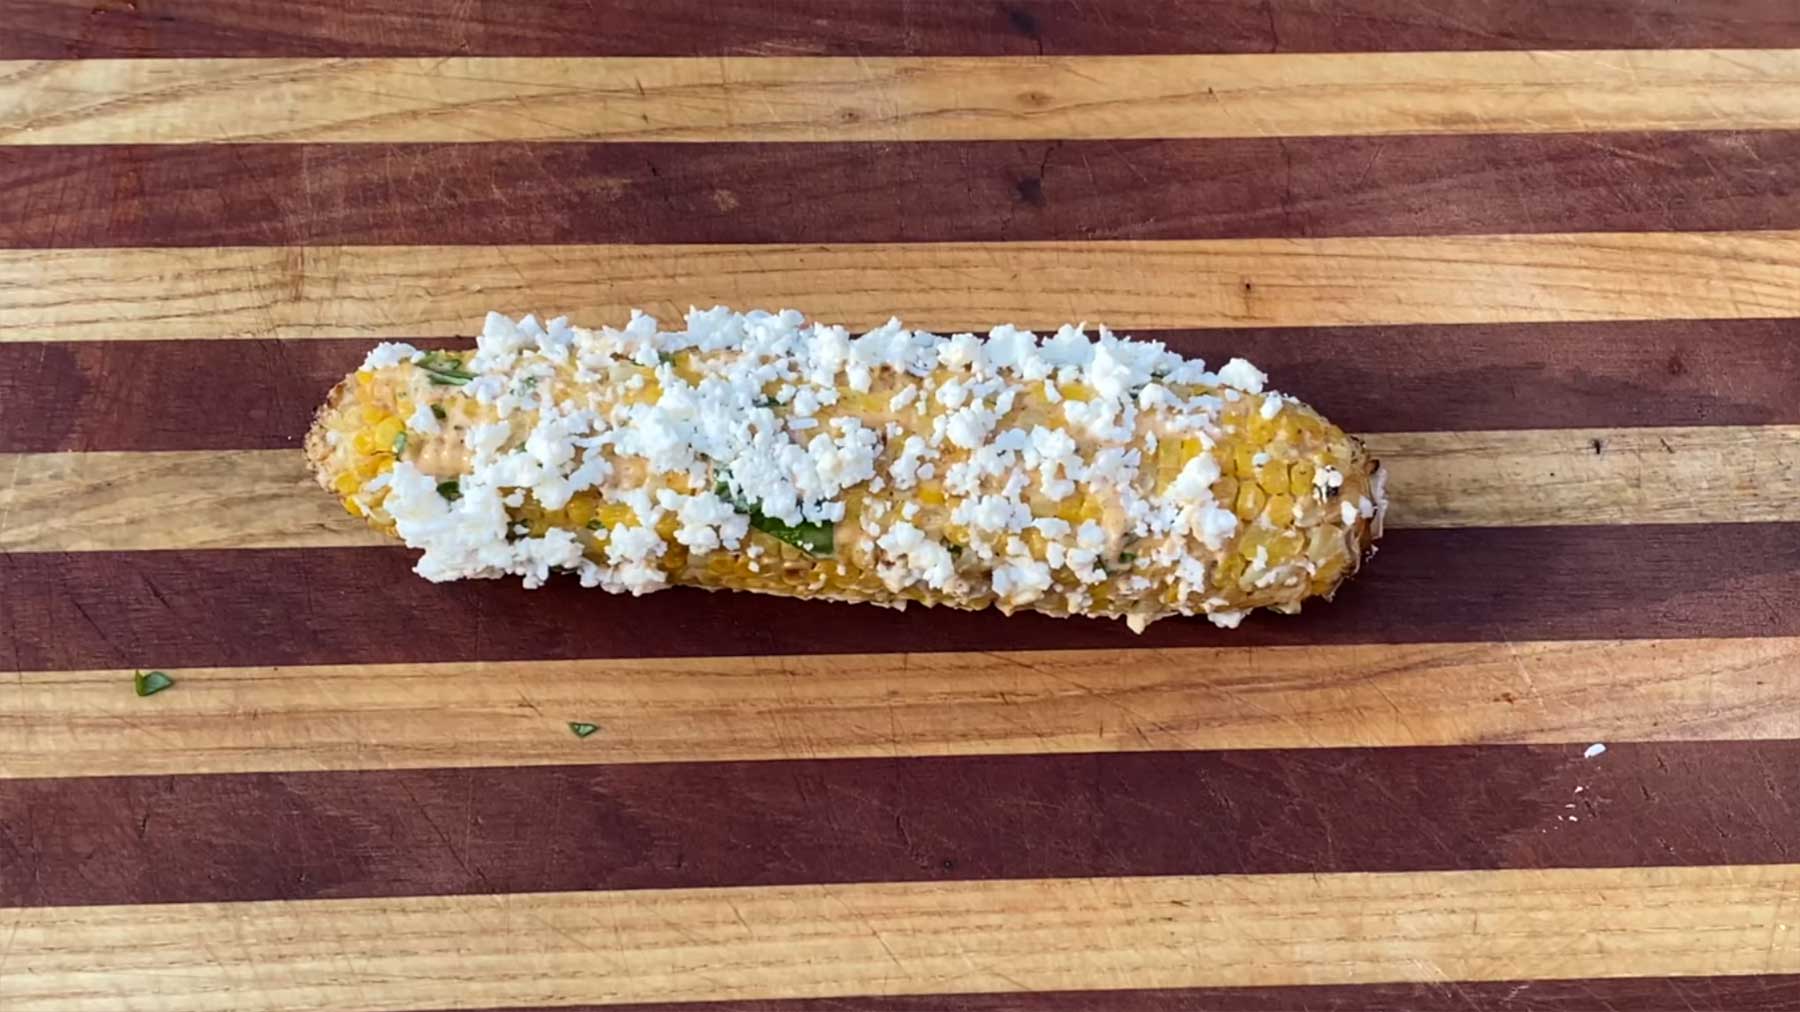 You Suck at Cooking: Corn on the Cob 5 Ways (Episode 114)